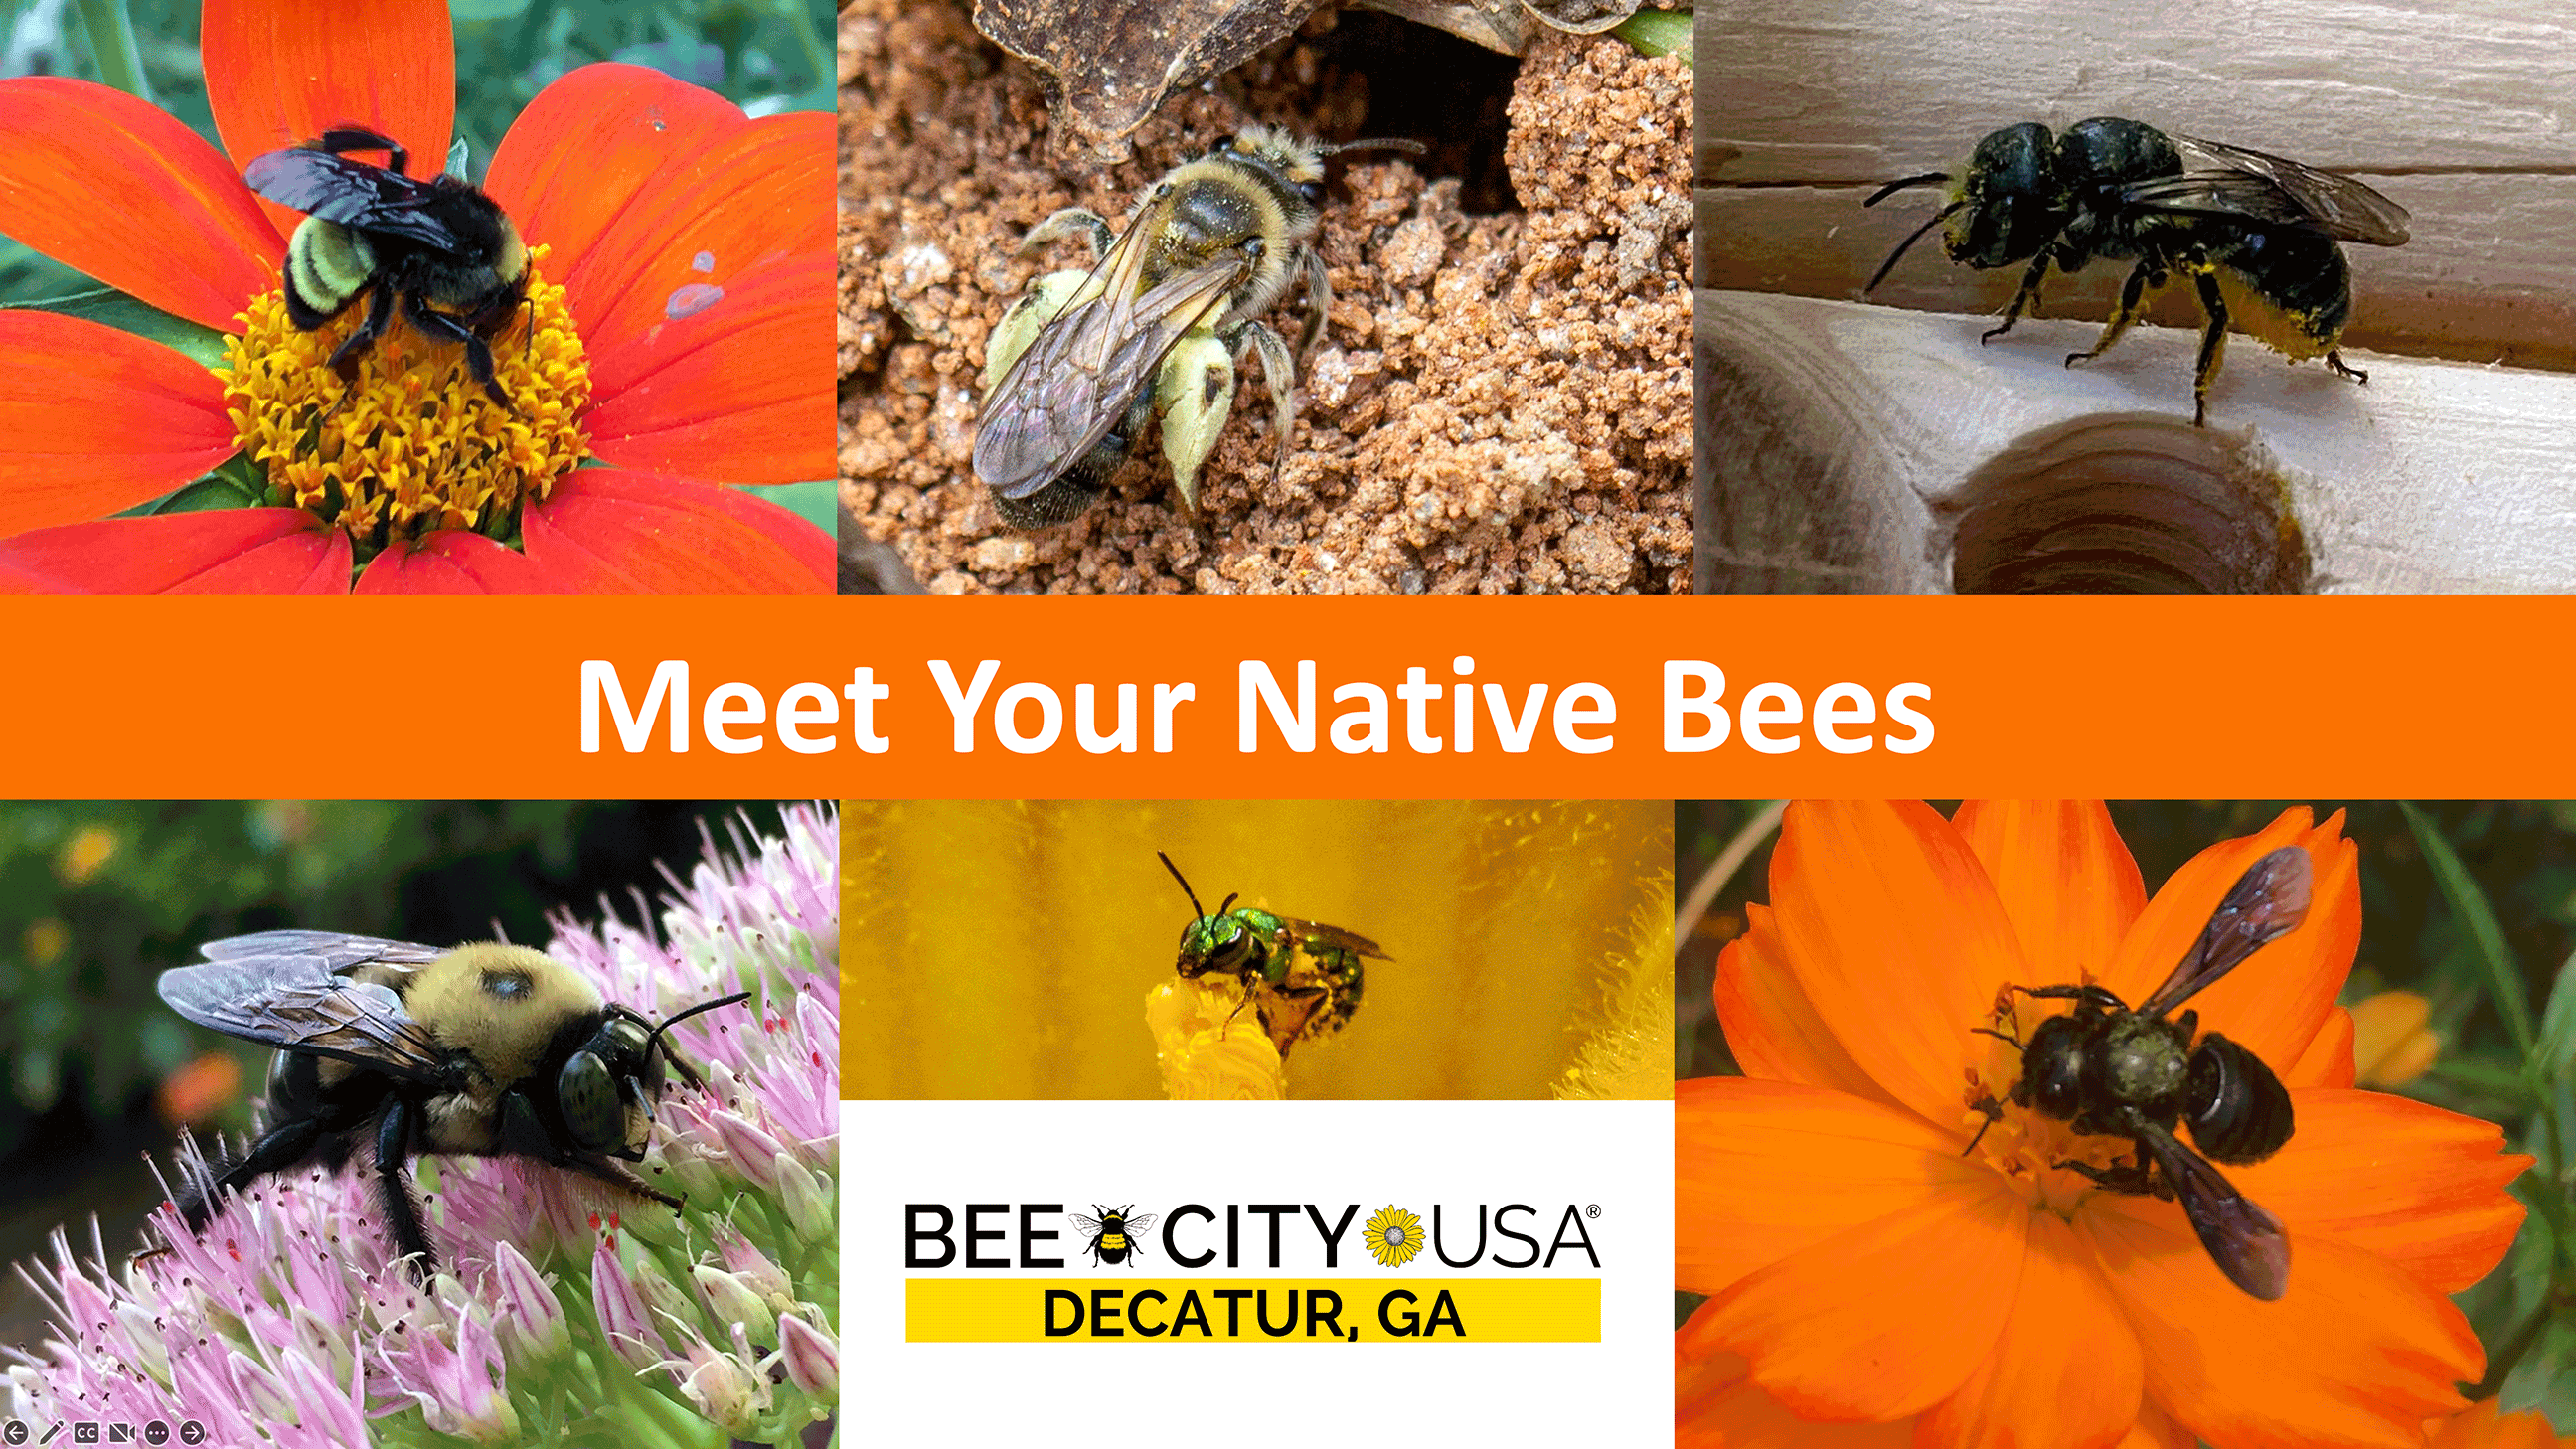 Meet your native bees.